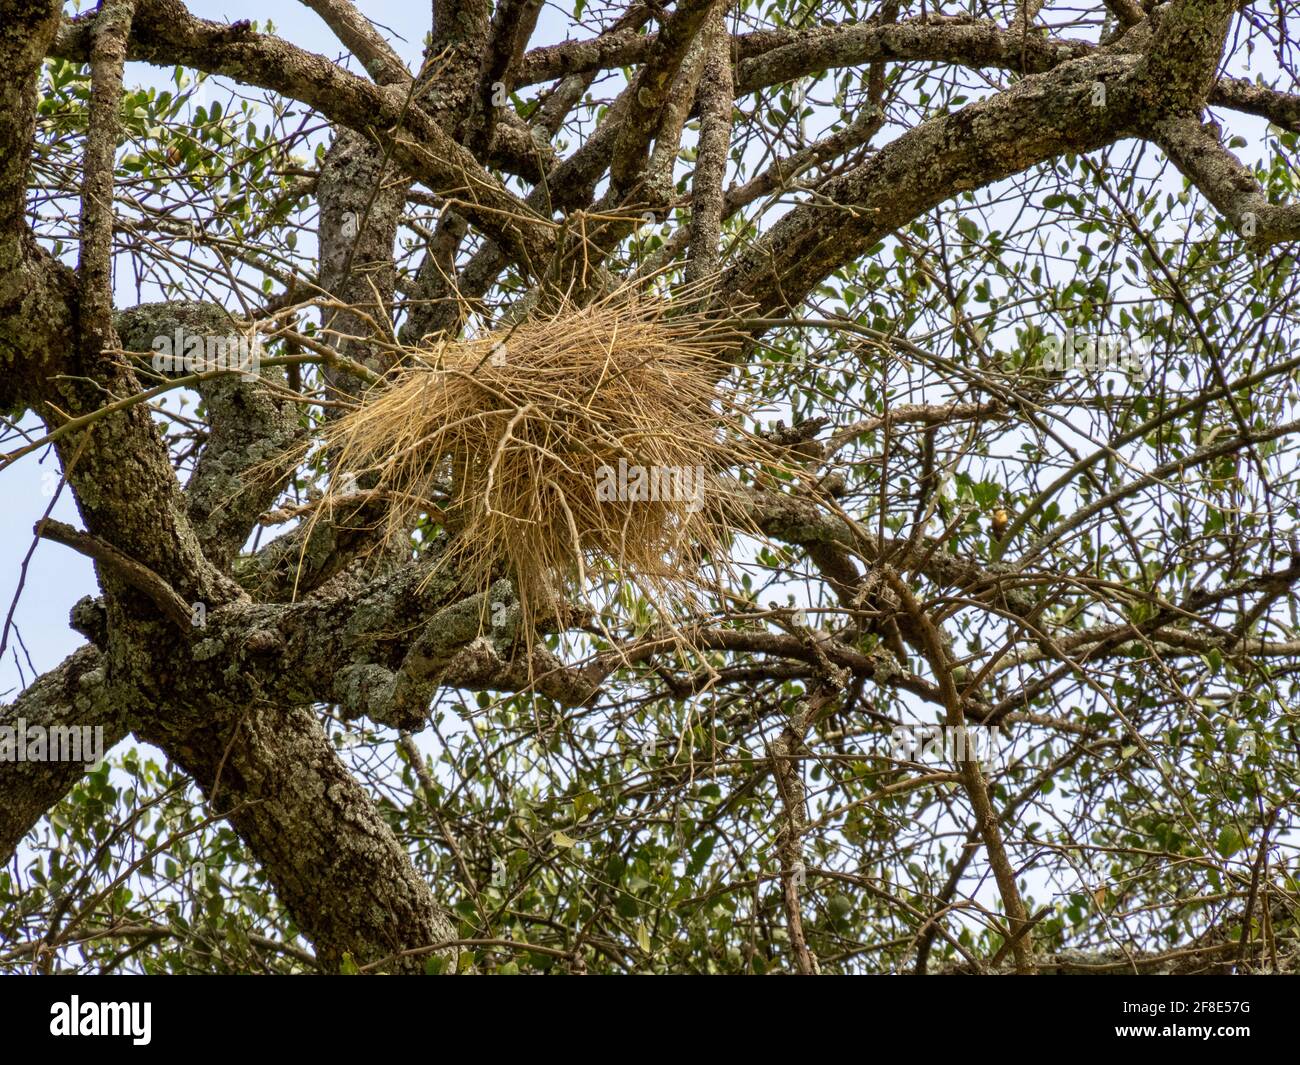 Serengeti National Park, Tanzania, Africa - February 29, 2020: Superb Starling nest hanging in a tree Stock Photo